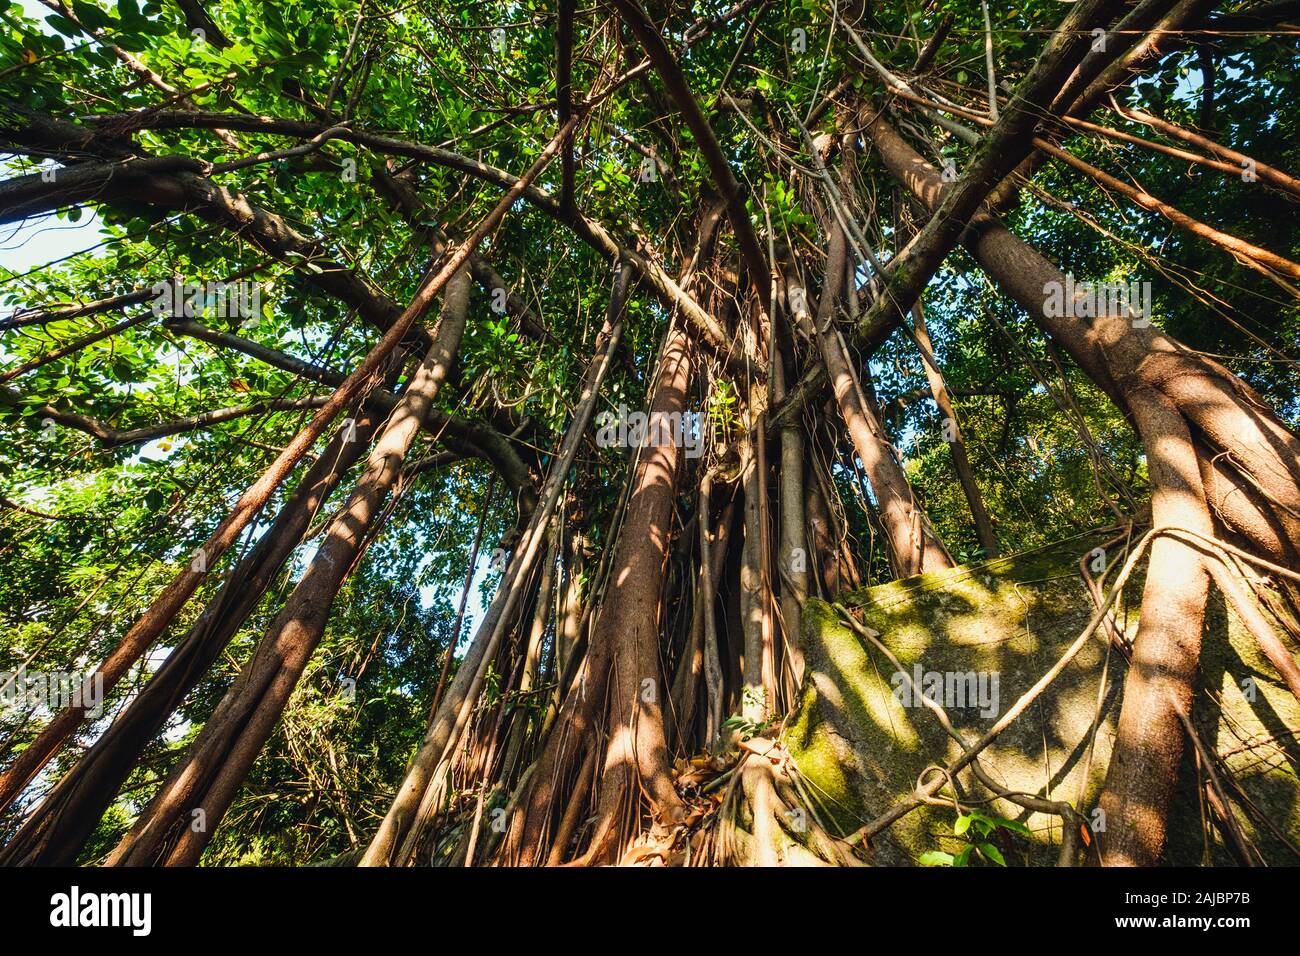 big ficus tree in jungle forest or rainforest Stock Photo